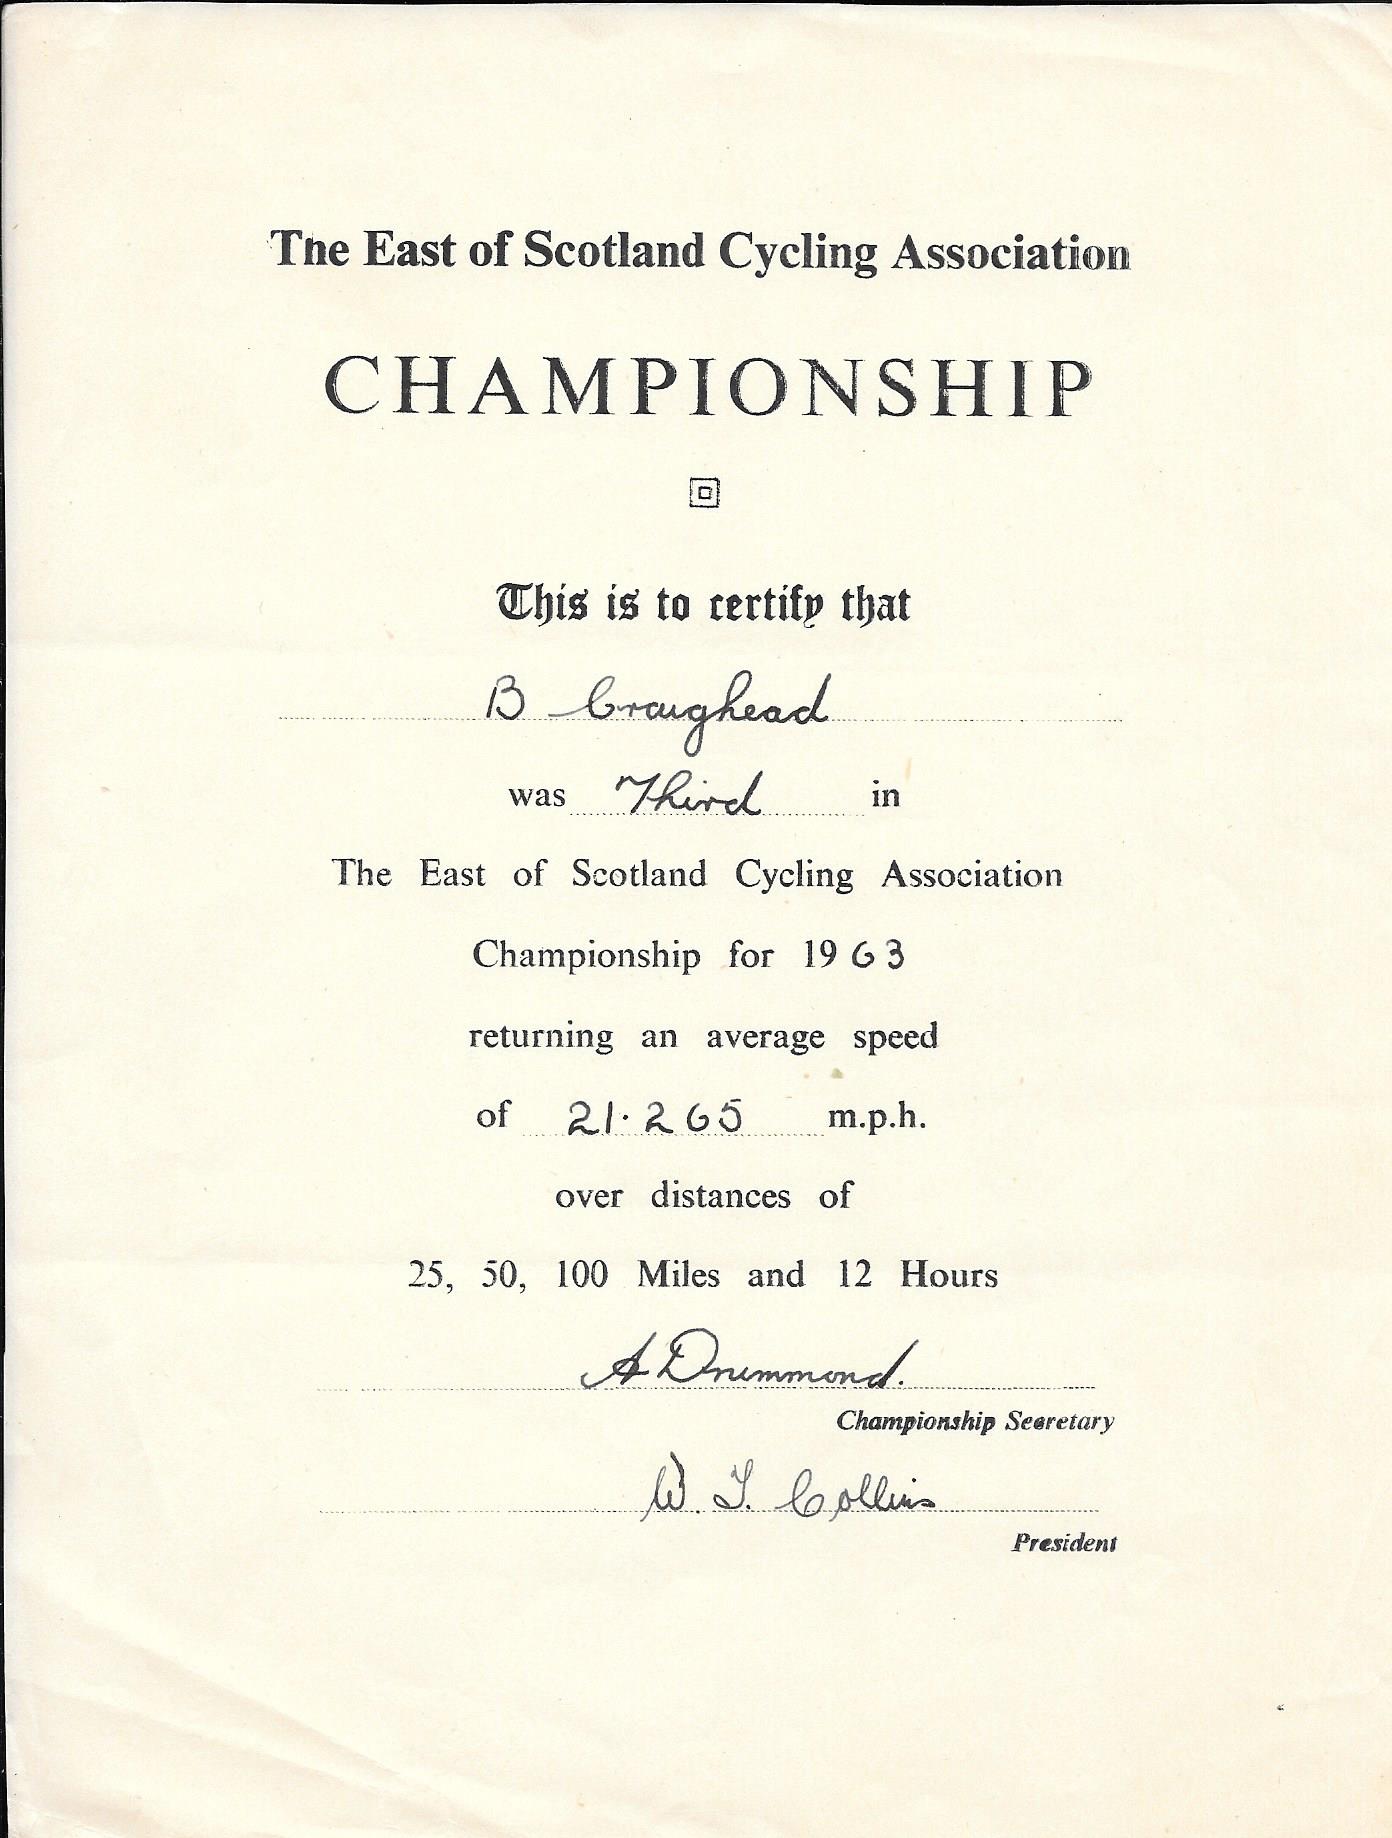 East of Scotland Cycling Association Championships 1963